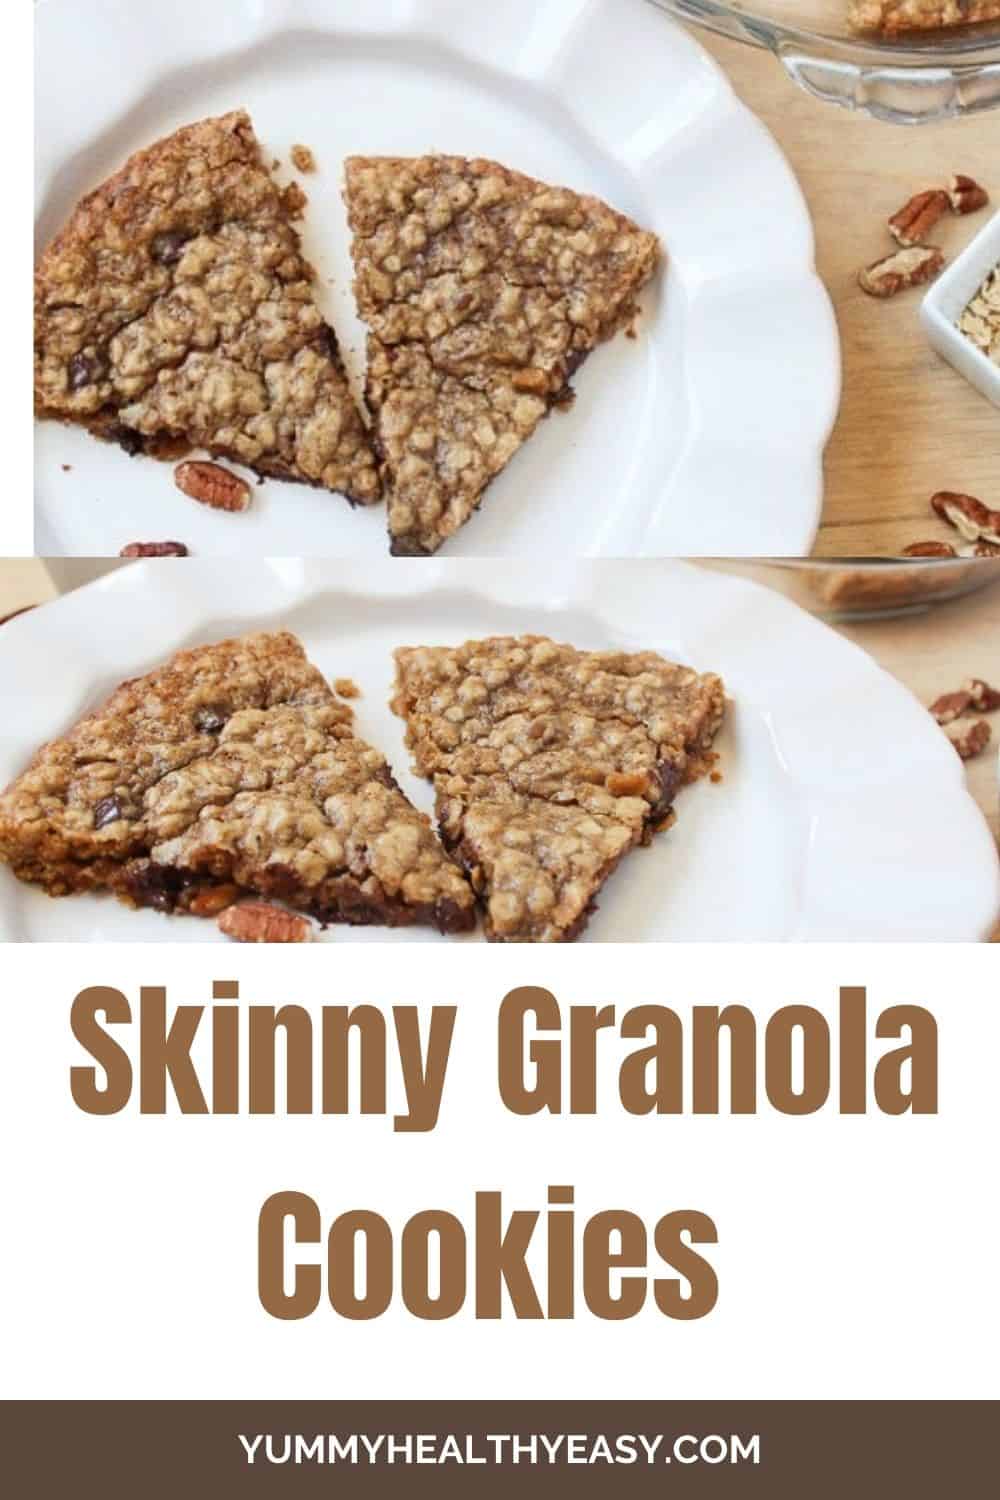 These pie-shaped Skinny Granola Cookie Wedges taste like a chocolate chip cookie but also taste like granola AND is low calorie all at the same time! #healthydessert #cookies #granola #chocolate #dessert #healthy #easydessert via @jennikolaus